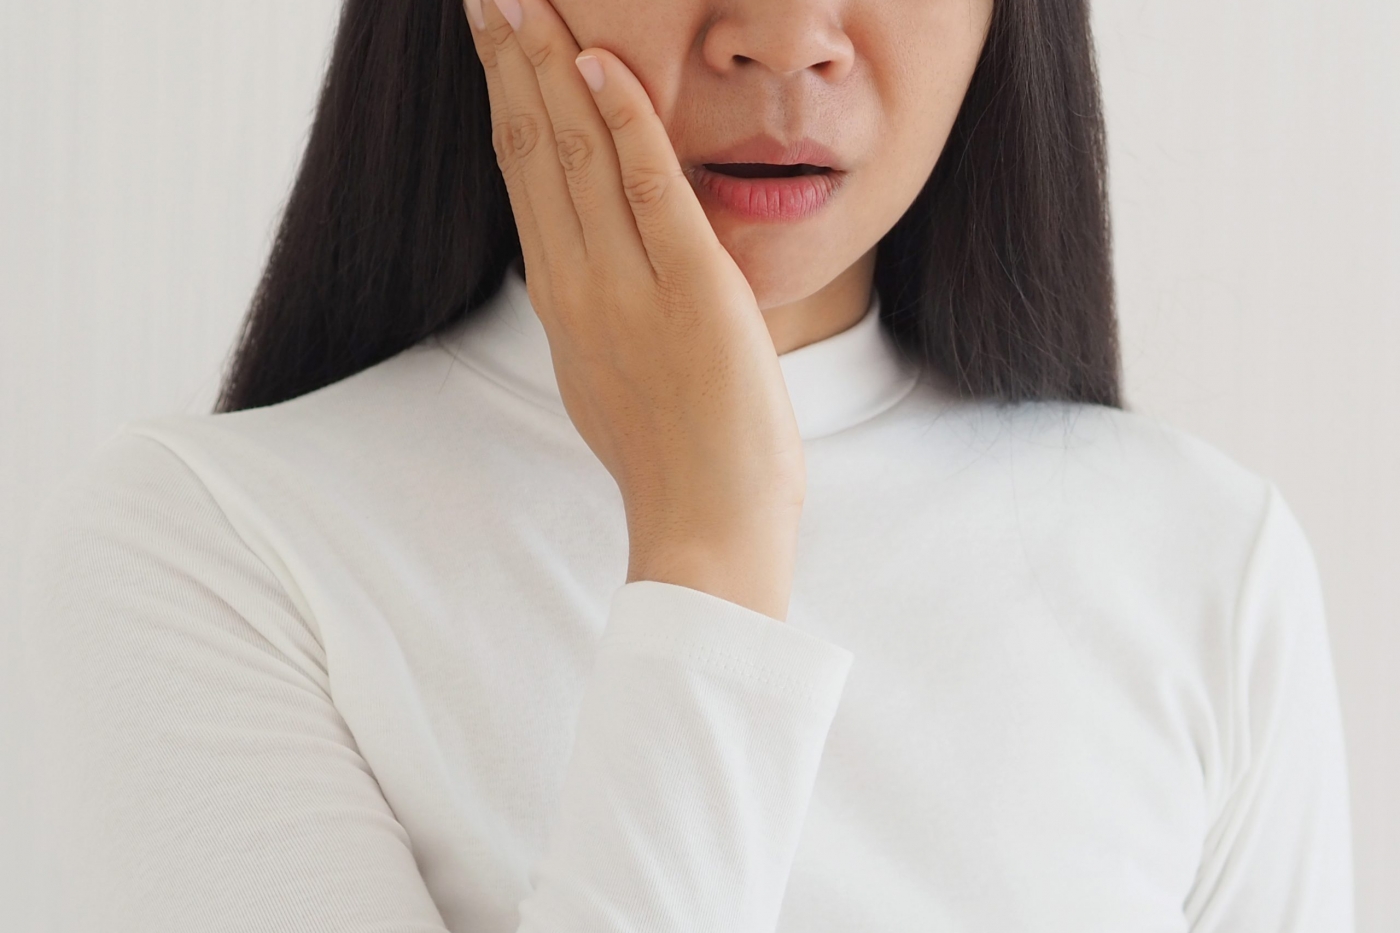 trigeminal neuralgia and temporomandibular joint and muscle disorder in asian woman, She uses hand touching her cheek and symptoms fo pain and suffering on isolated white background.